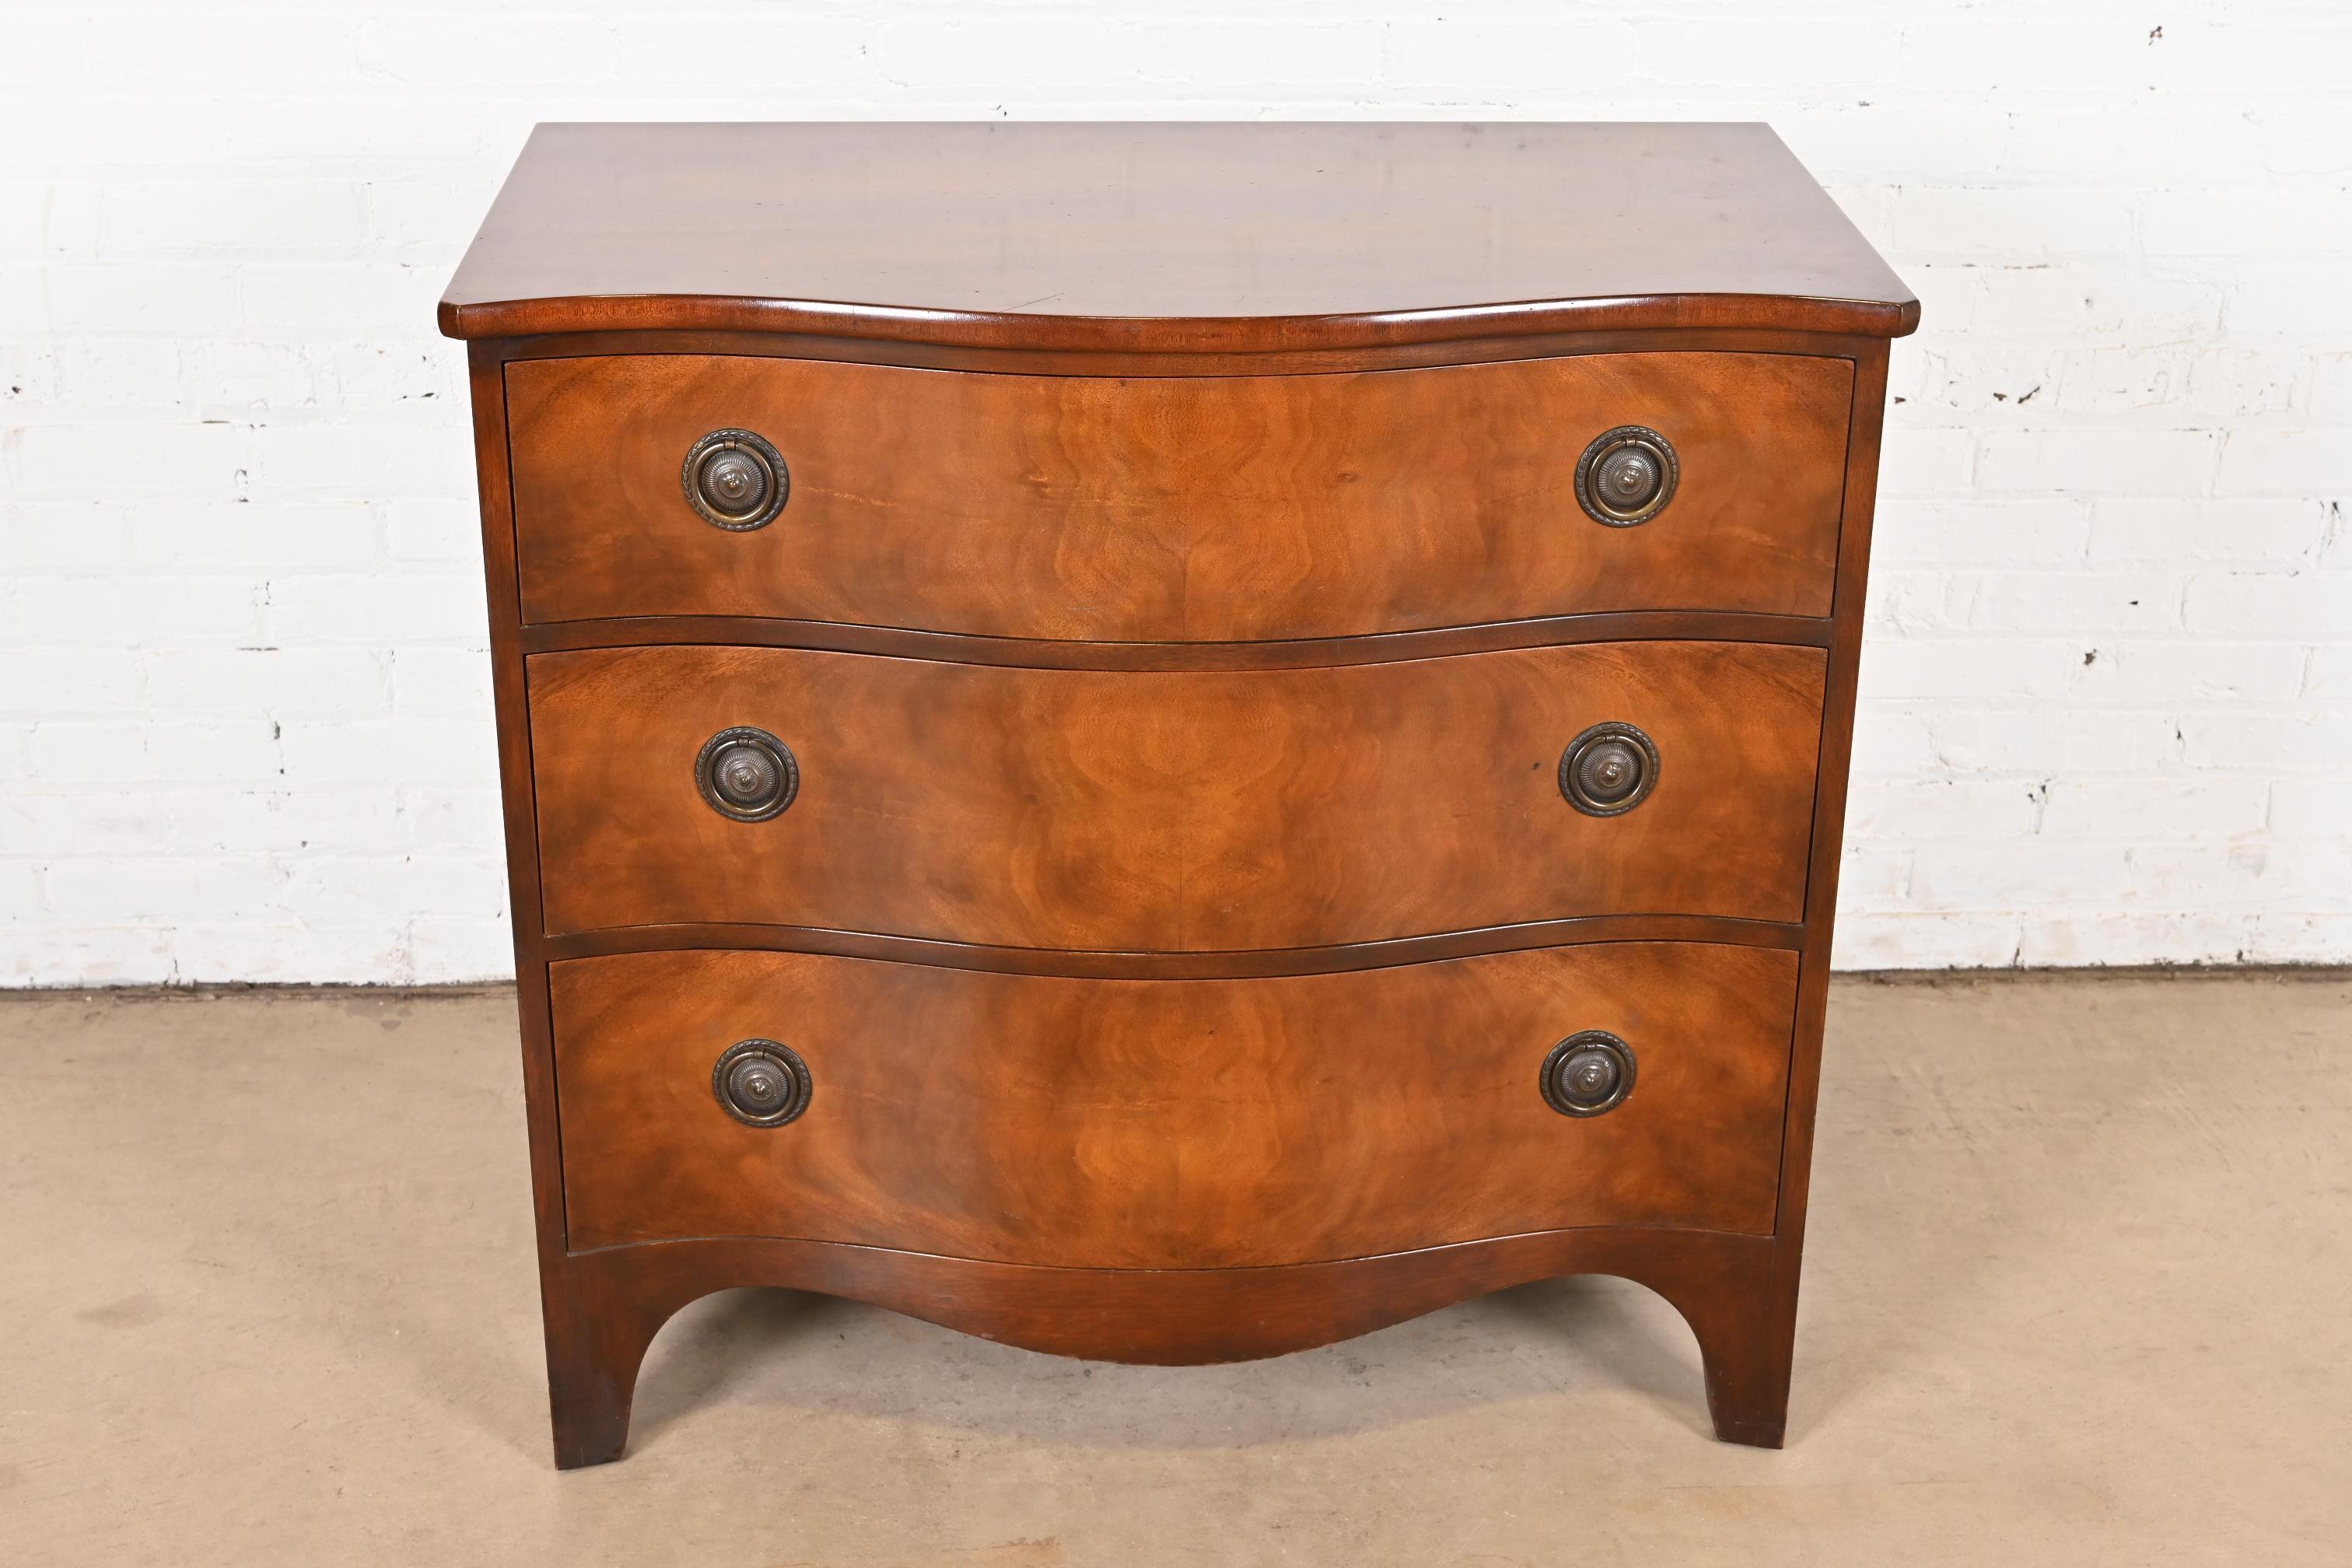 A beautiful Georgian or Regency style mahogany dresser or chest of drawers

By Baker Furniture

USA, Circa 1960s

Beautiful book-matched mahogany, with original brass hardware.

Measures: 36.25